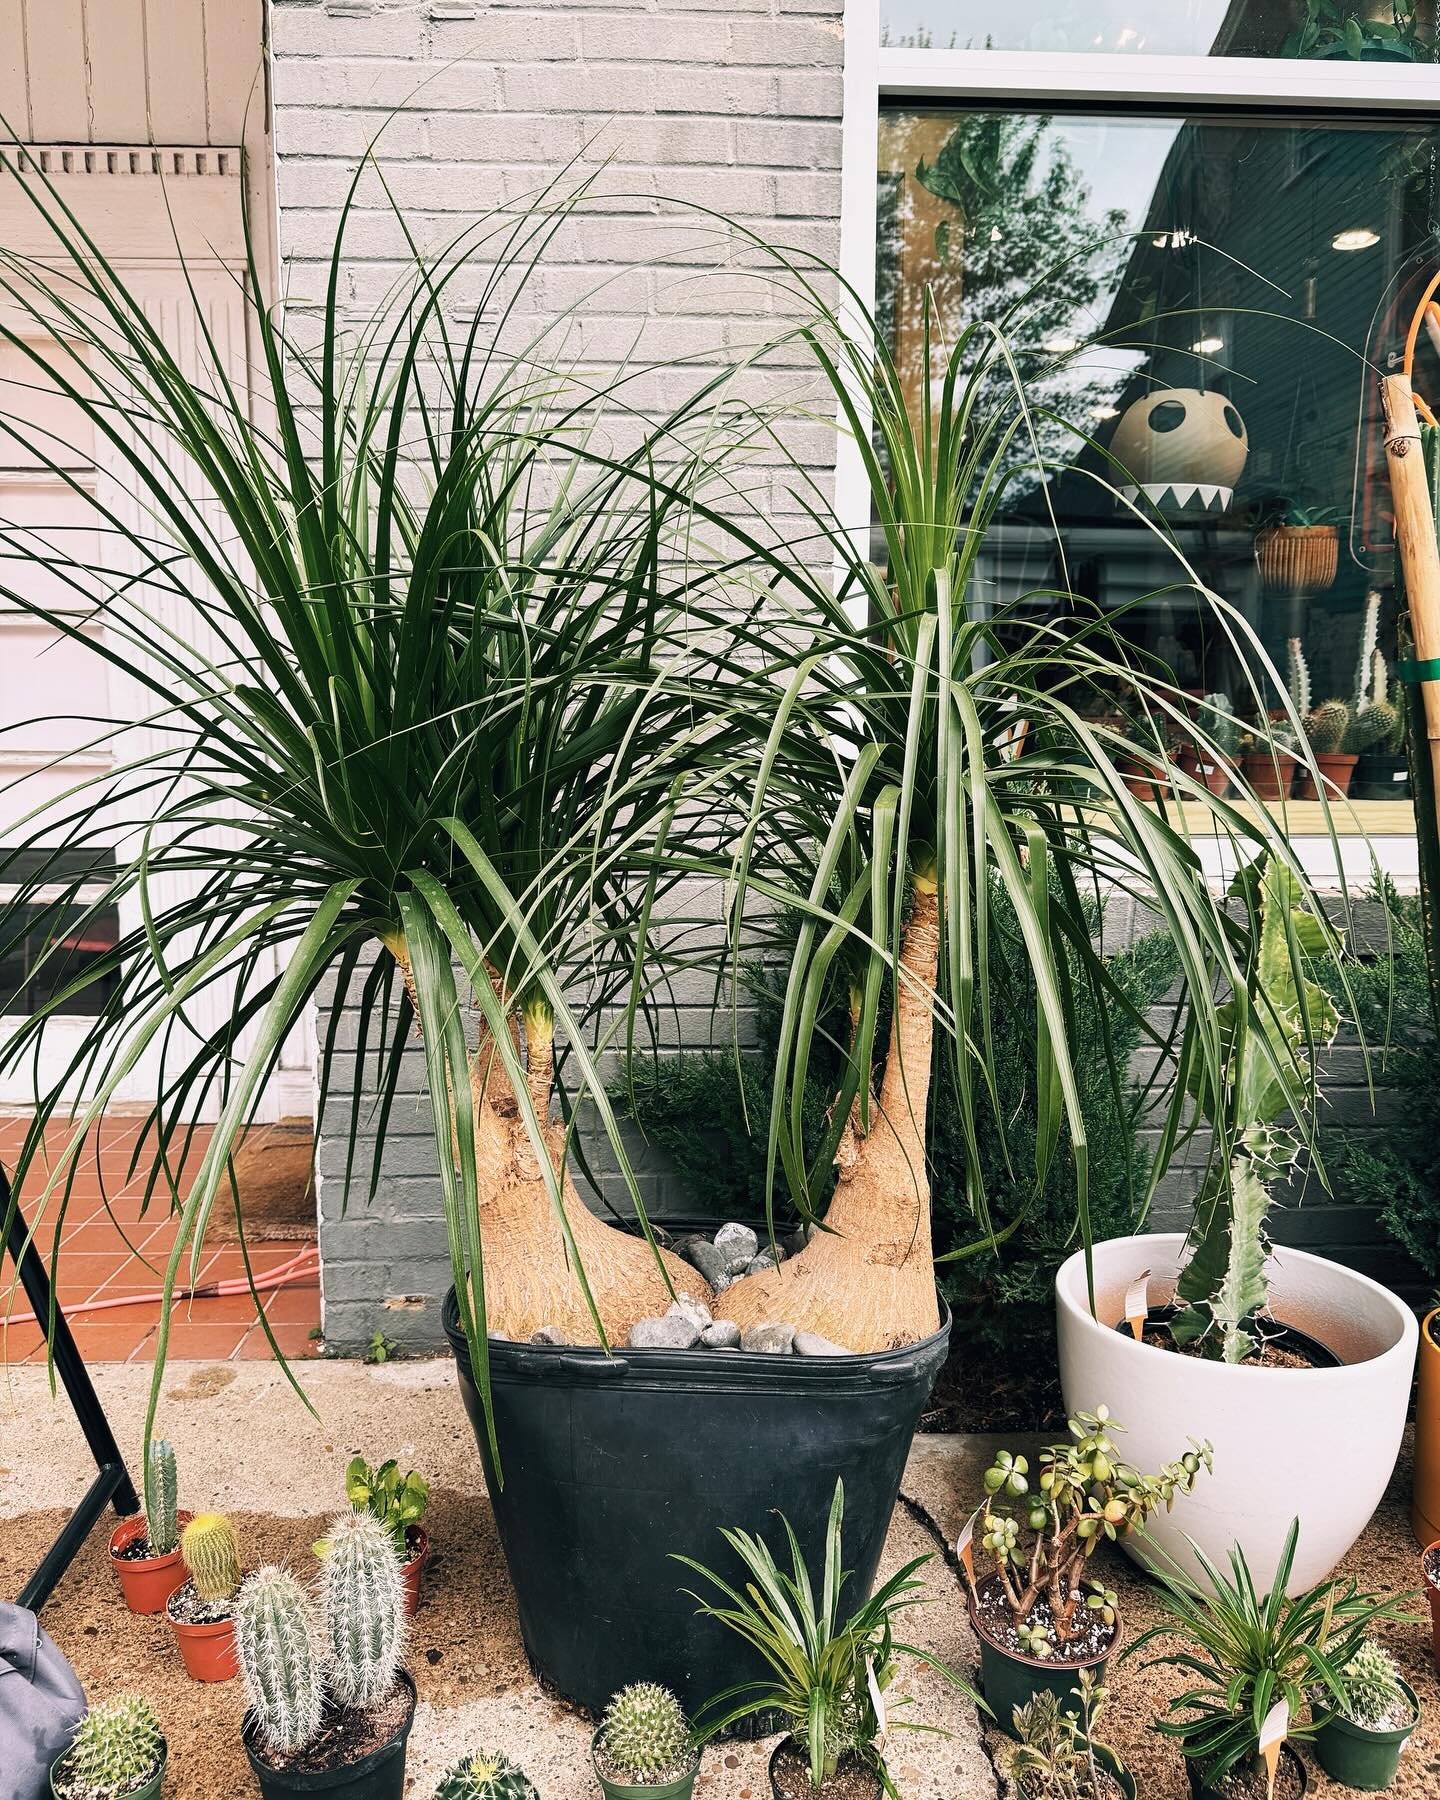 We&rsquo;re so in love with this massive Ponytail Palm. We thought we&rsquo;d try to split it, but it&rsquo;s pretty magical the way it is. If you&rsquo;ve been looking for a fairly mature Ponytail, we&rsquo;ve got you covered.